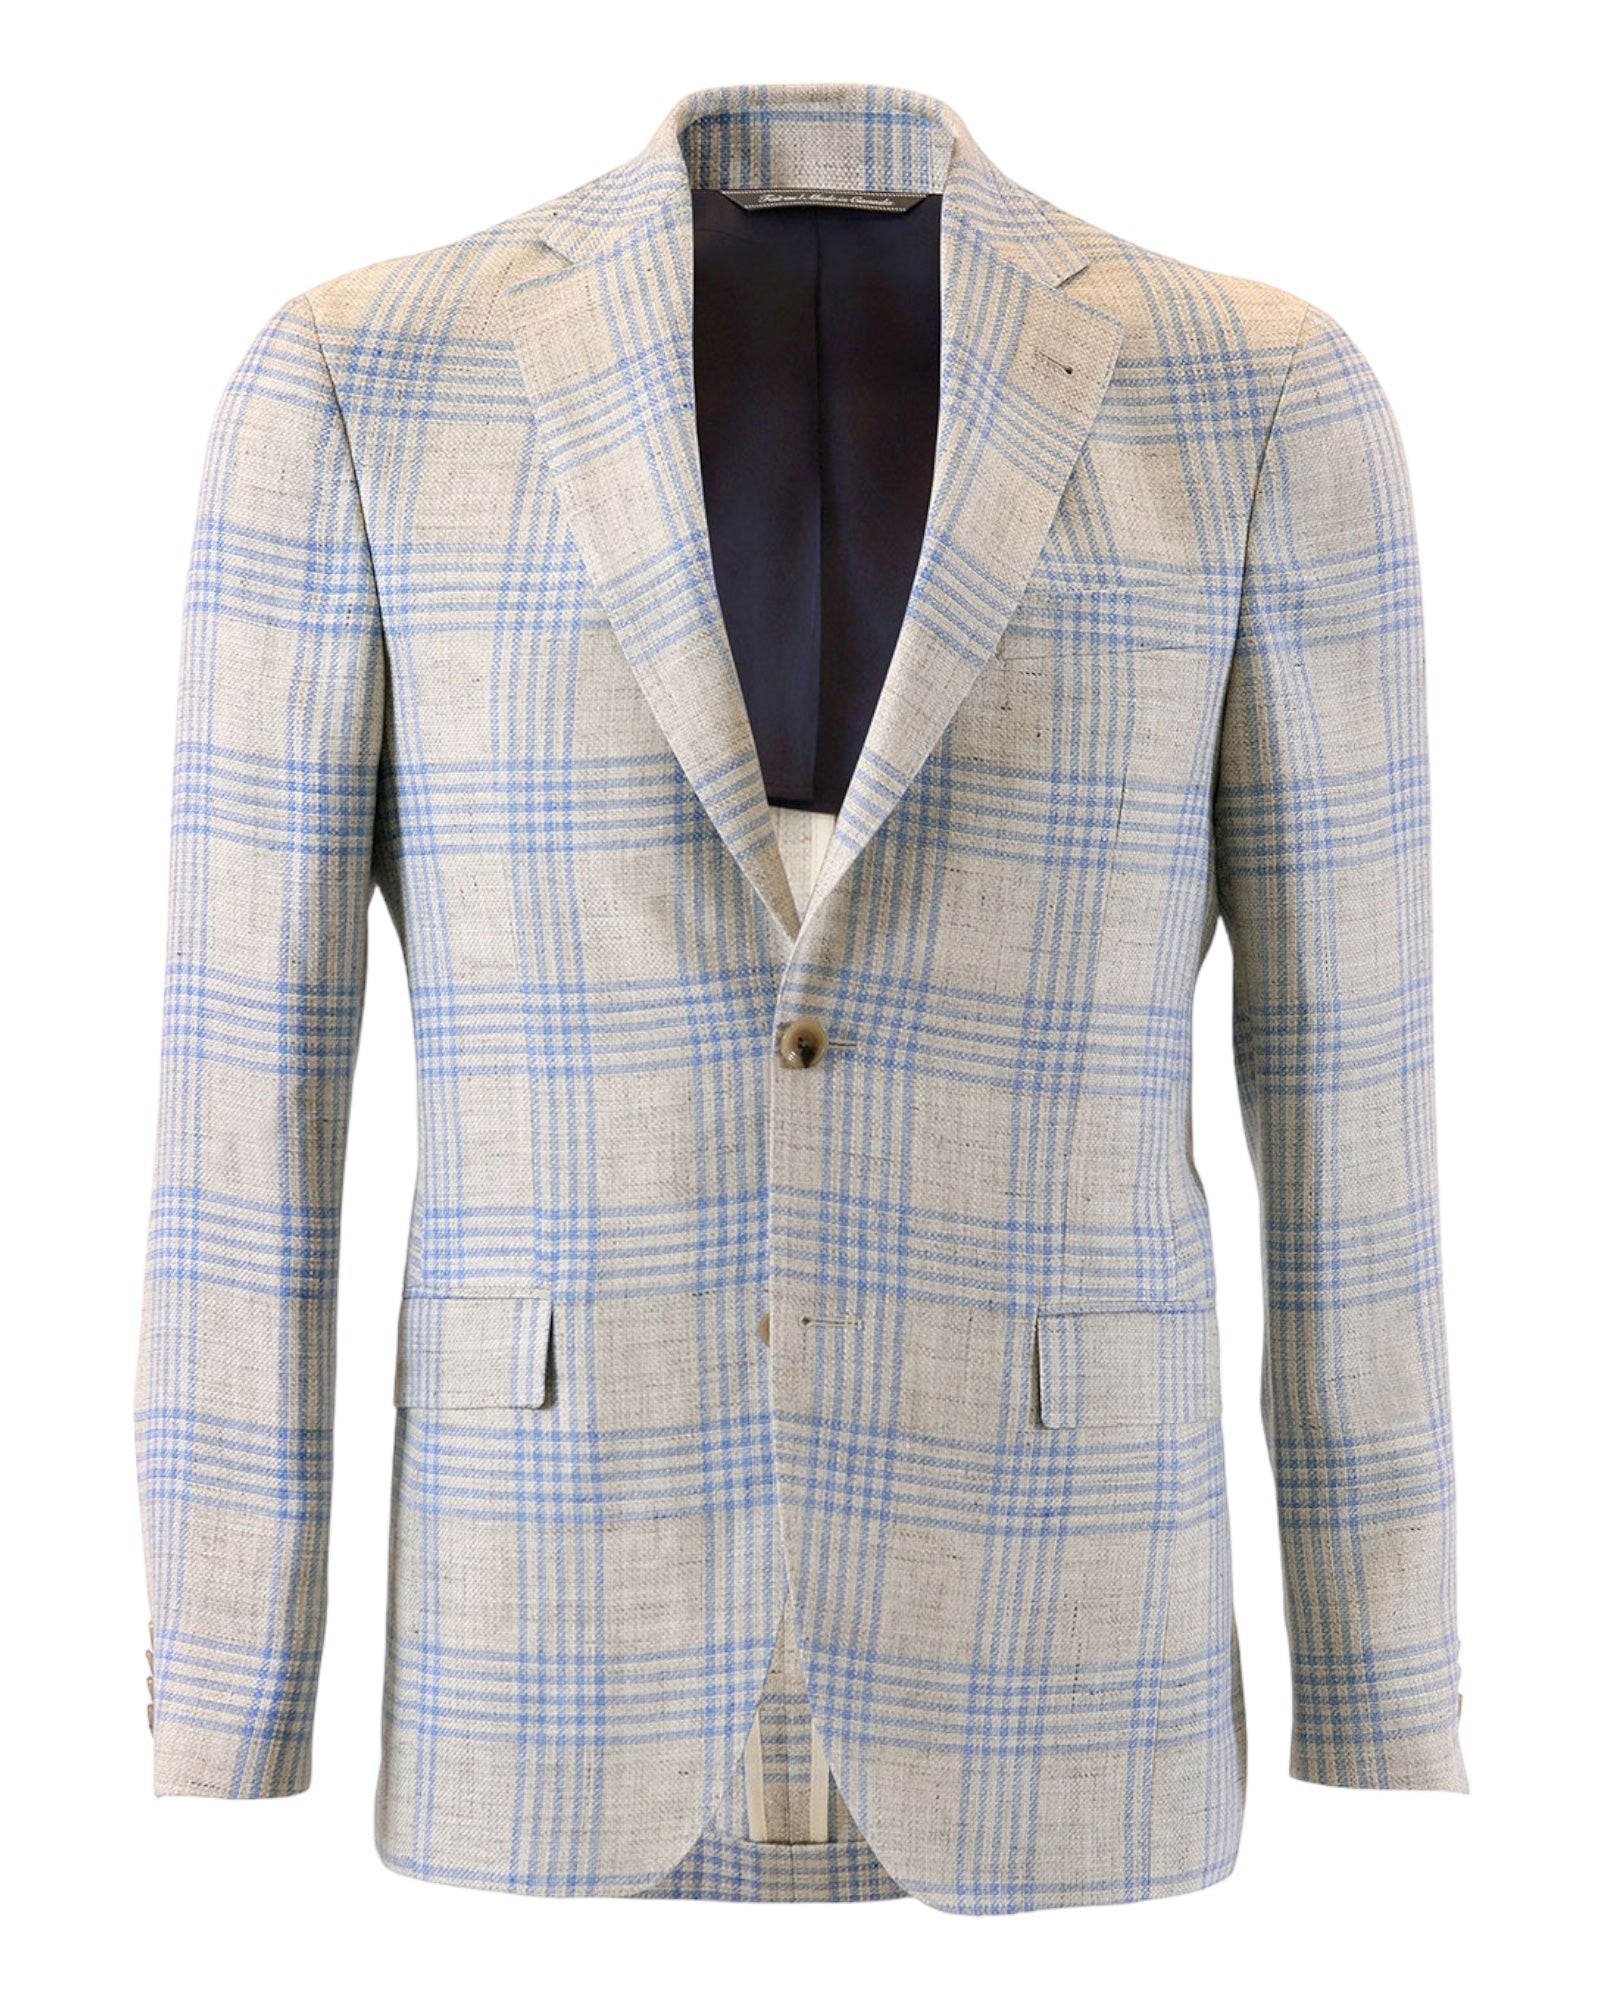 Linen &amp; Wool Jacket - Off-White with Blue Glen Check JACKETS38R